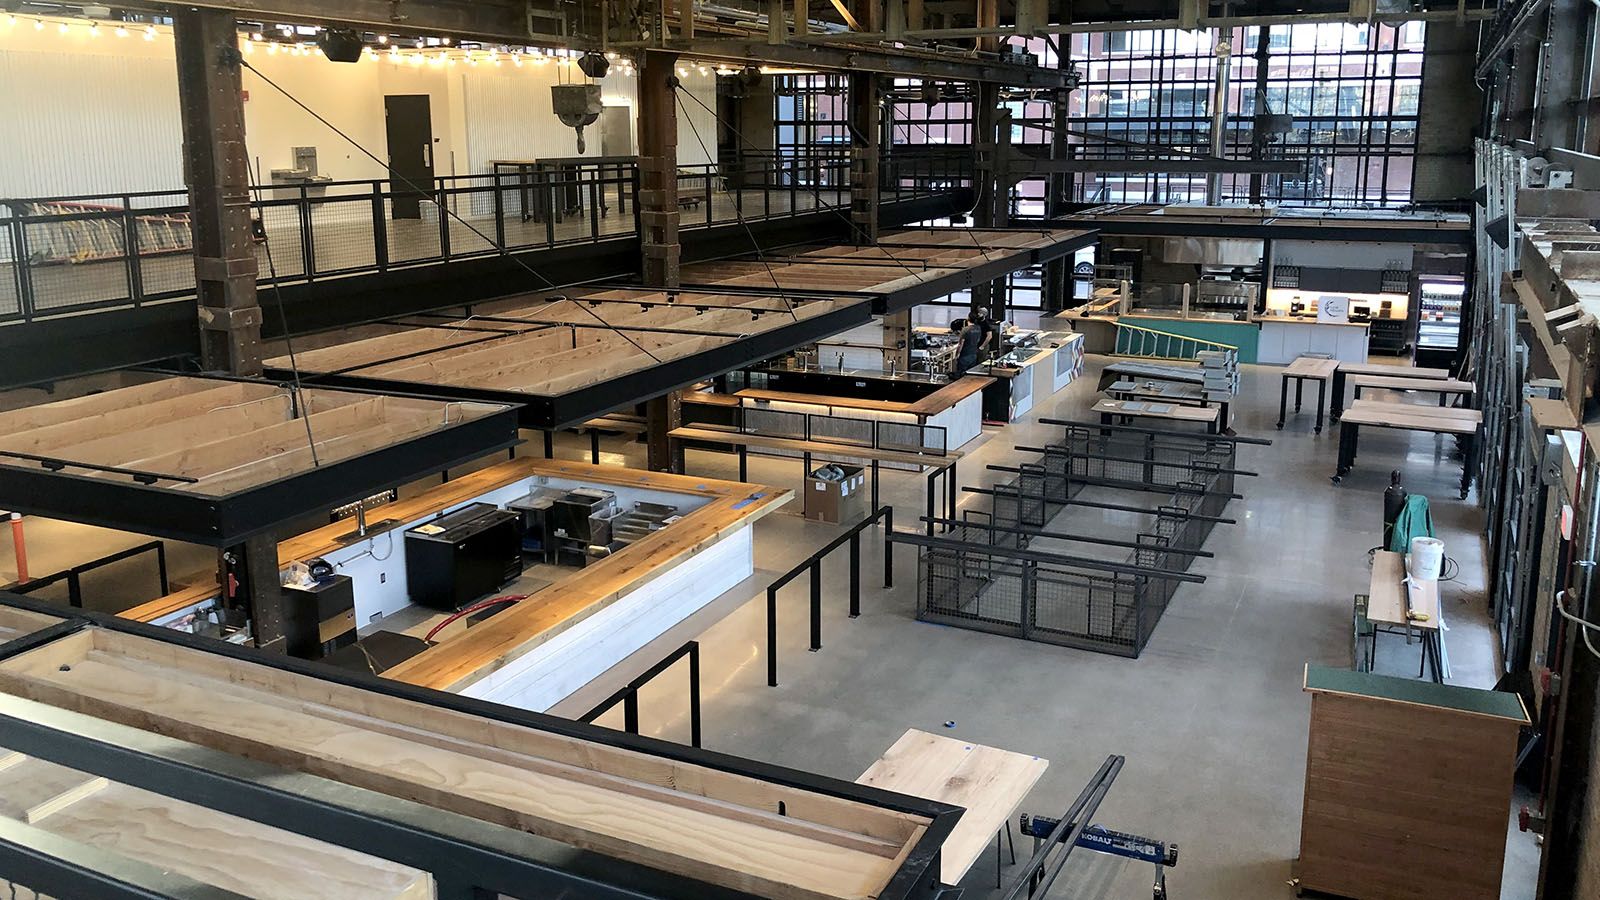 Union Street Market will open at Electric Works on Nov. 22.